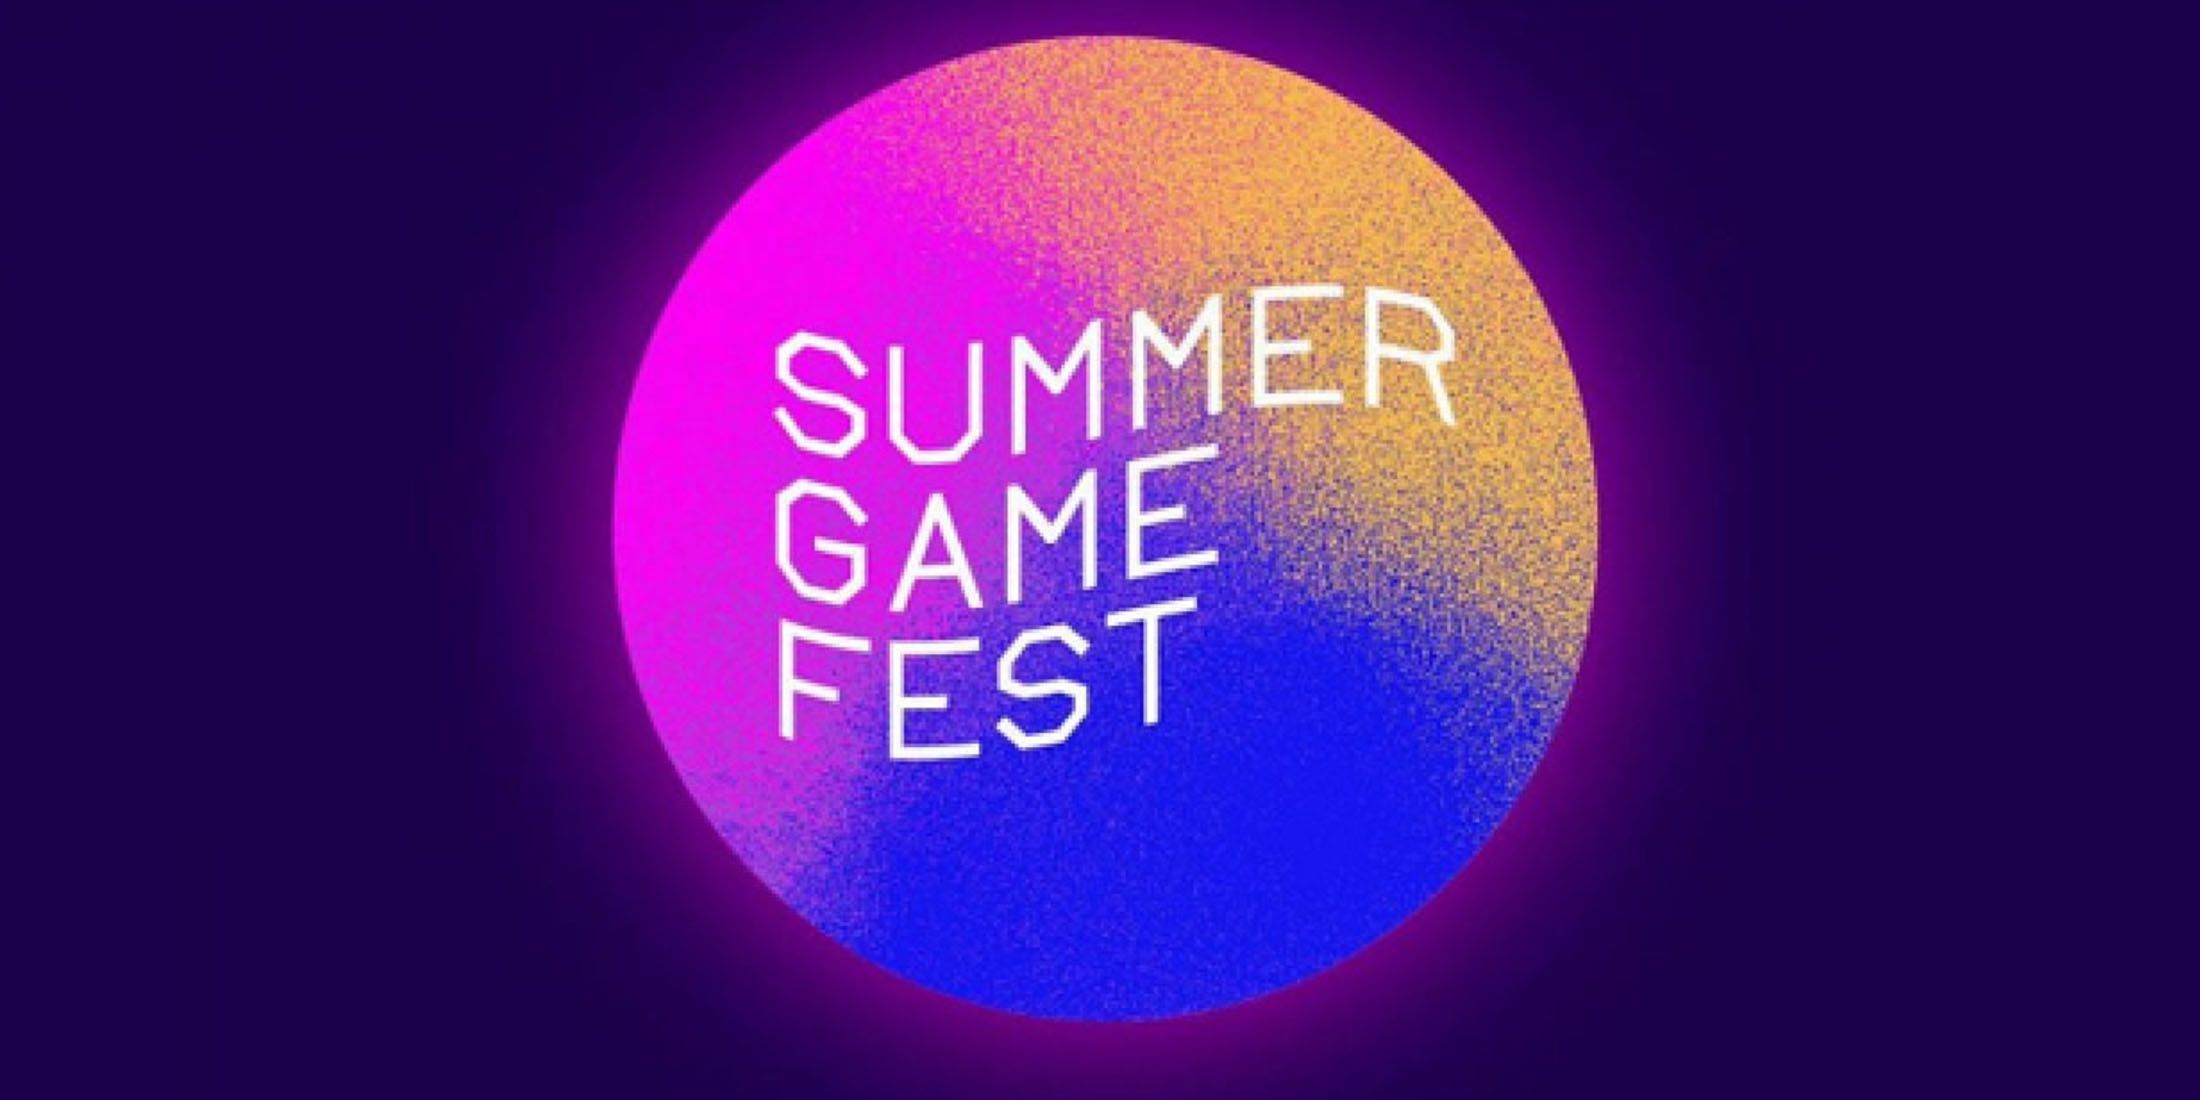 An image of the Summer Game Fest logo set against a dark purple background.